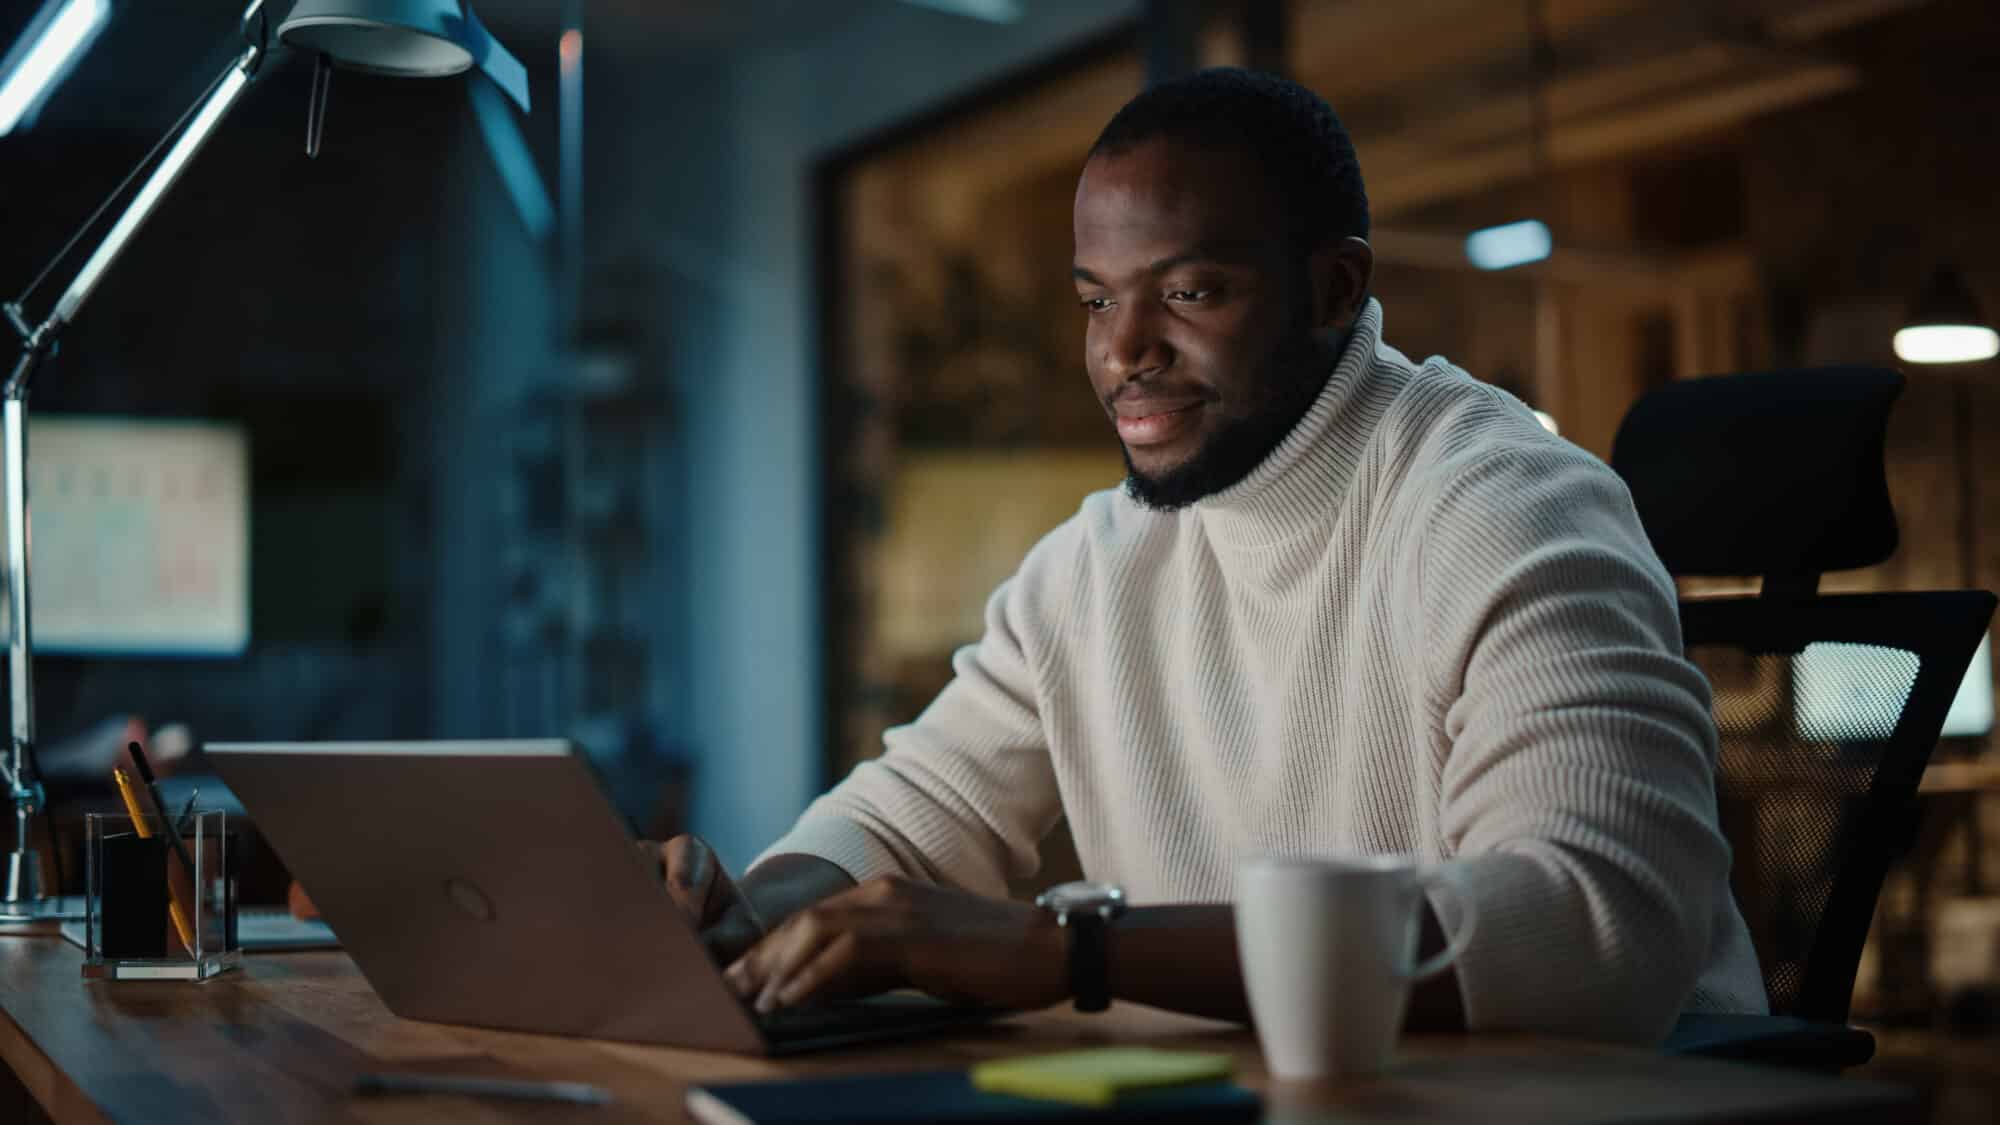 A man looking at a computer wearing a light sweater.